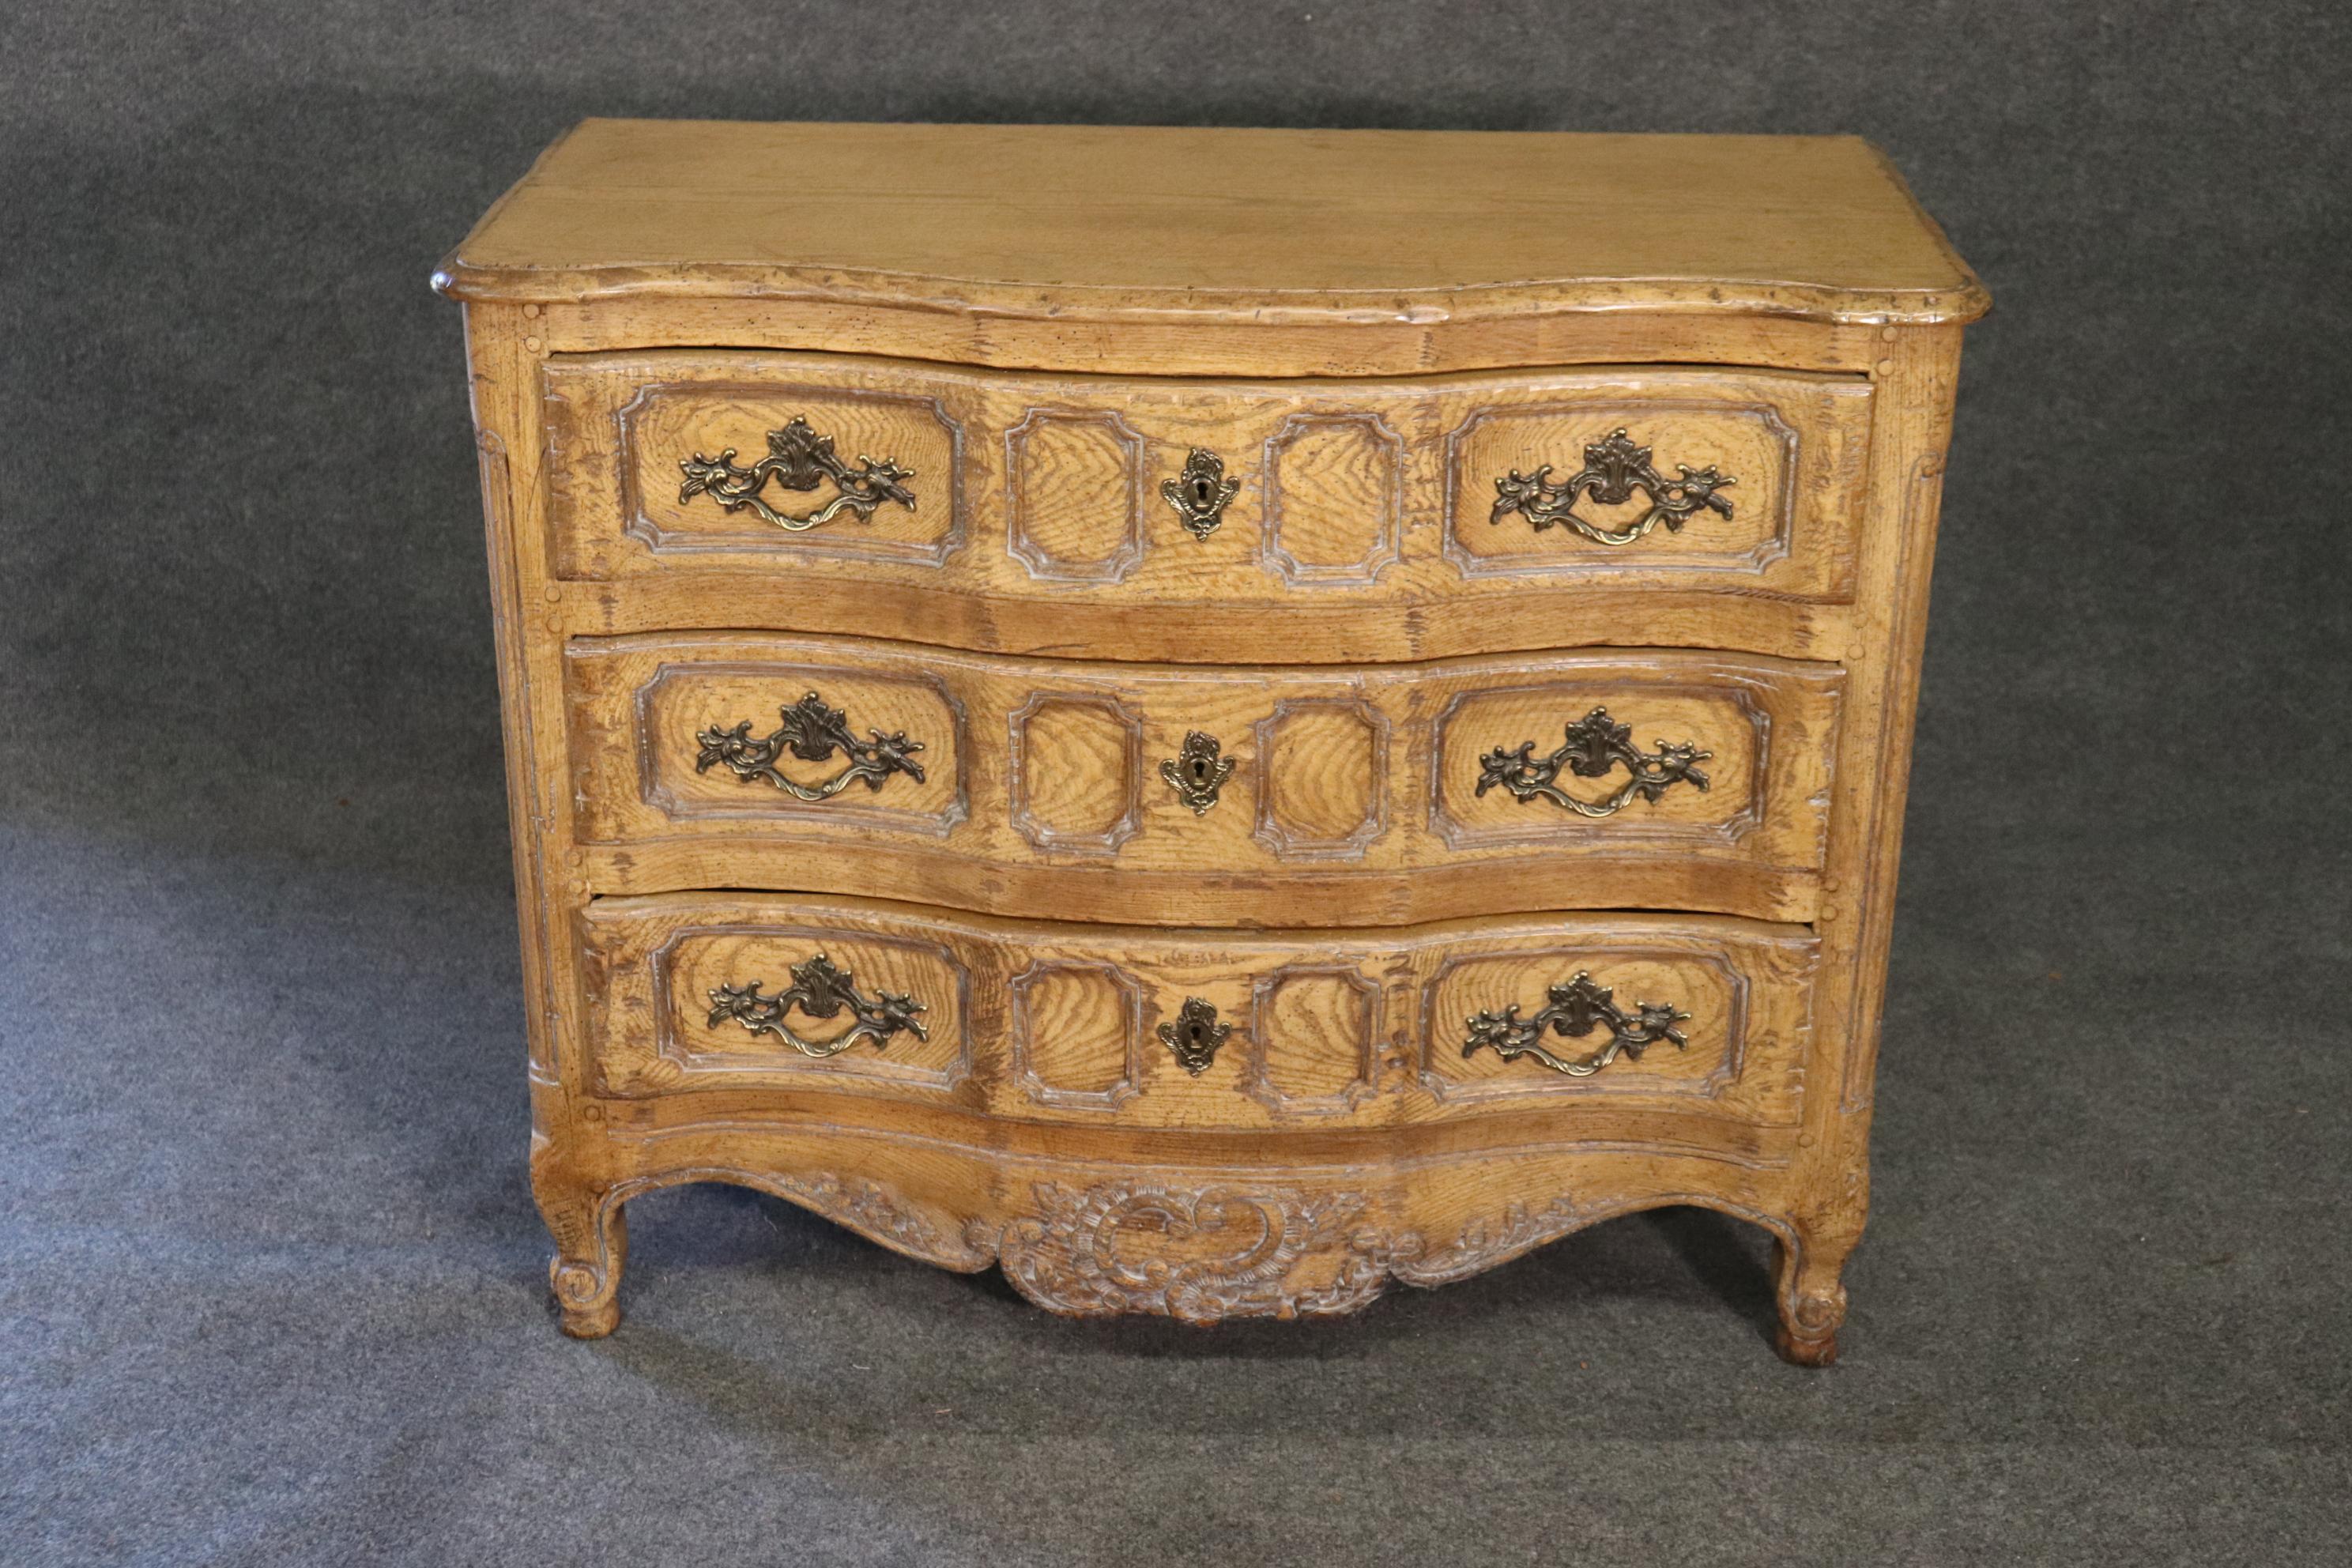 This is a gorgeous Piere Deux style commode from Baker furniture. The commode is extremely clean and needs nothing to be enjoyed today. The commode is made with a scrubbed oak finish and looks like its 200 years old. The piece measures 39 wide x 19